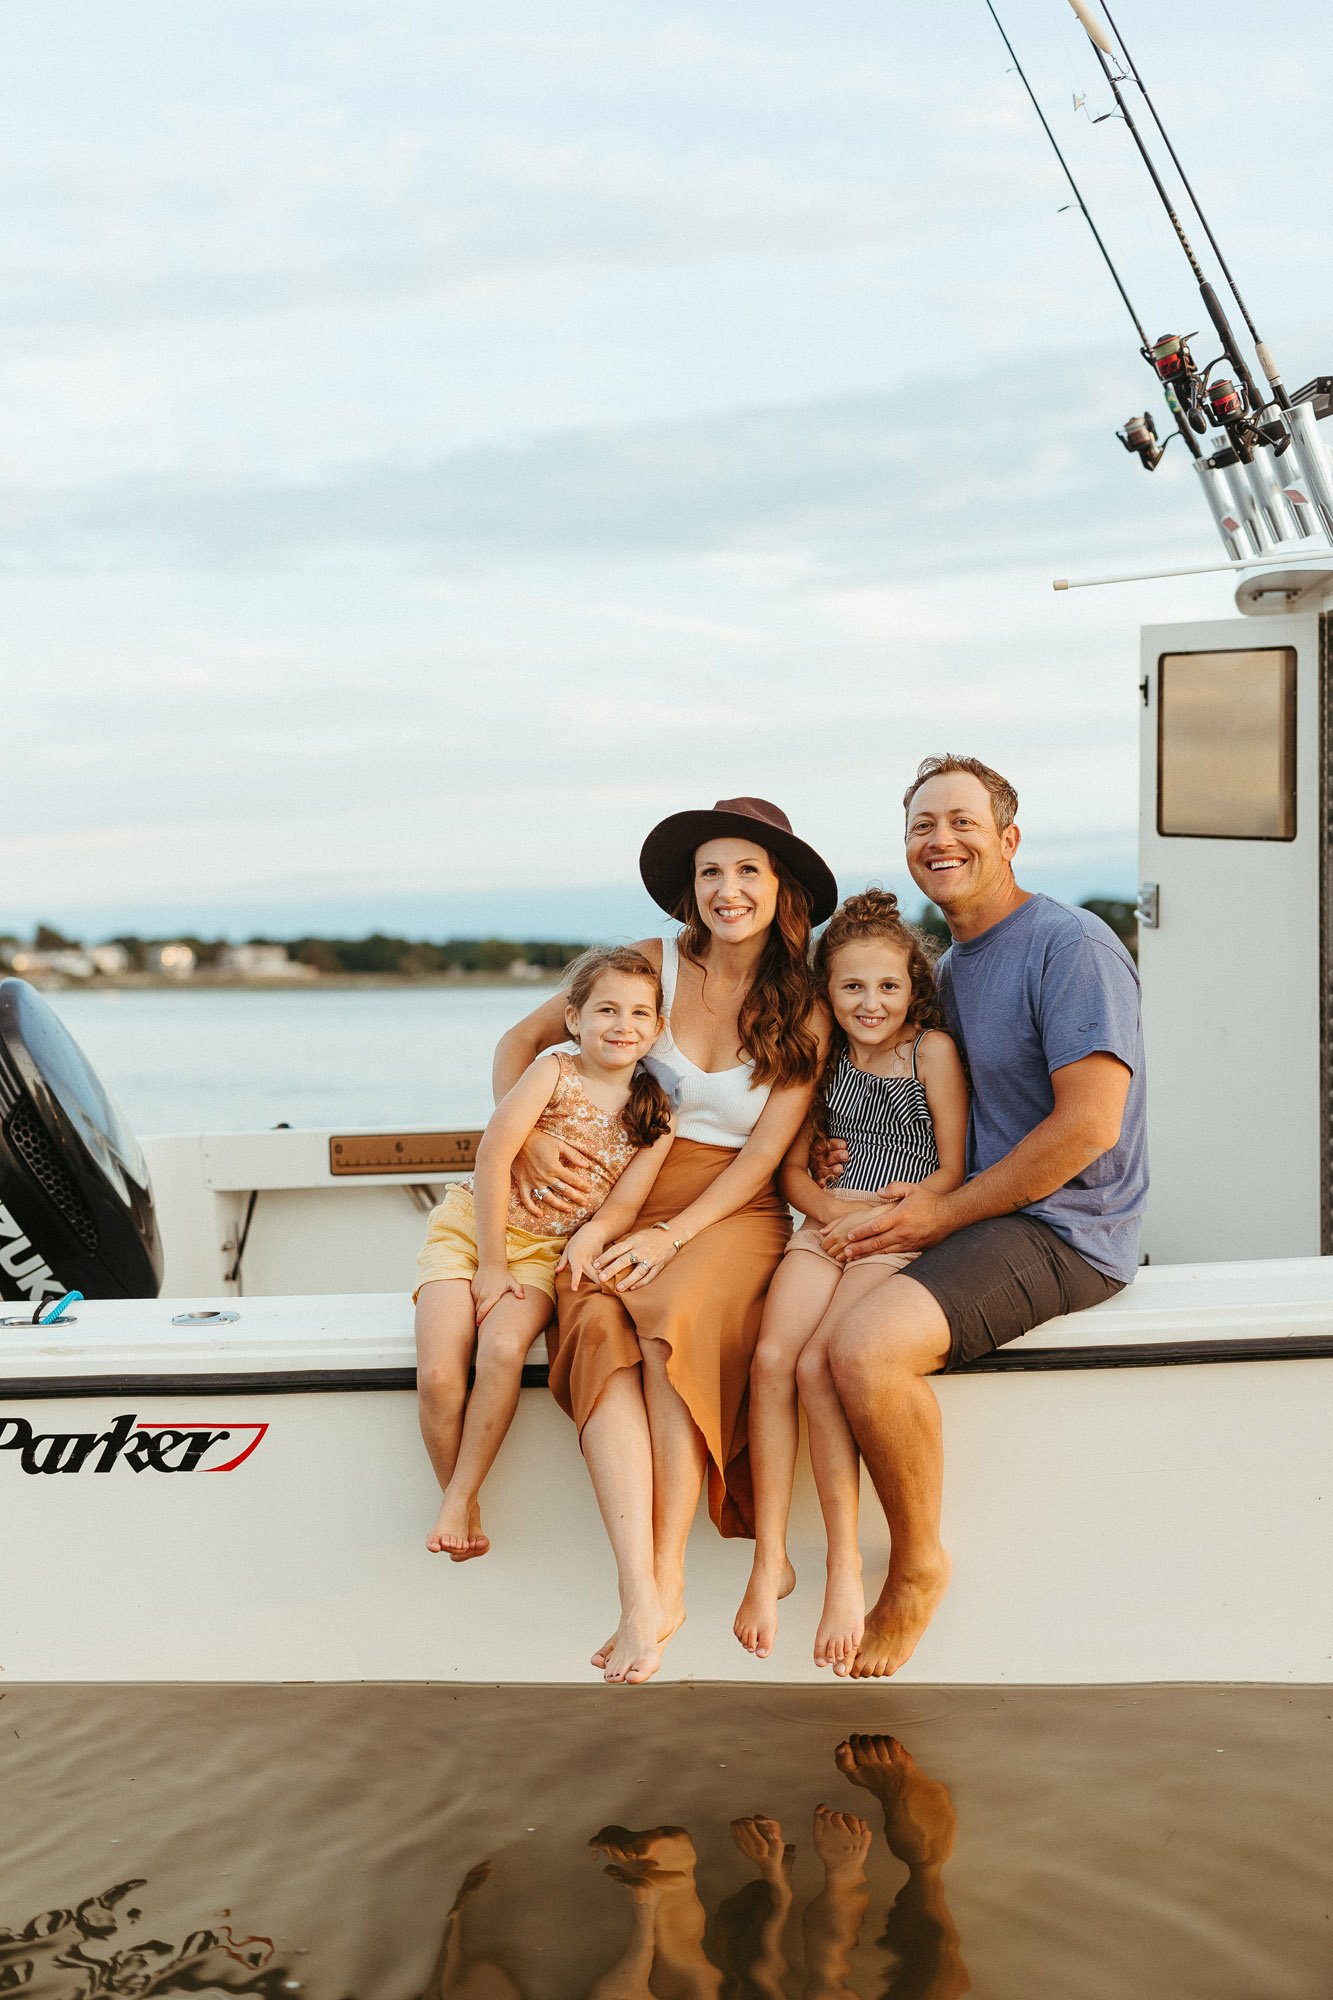 parents-two-daughters-sat-on-side-of-boat-family-photographer-autumn-skye.jpg